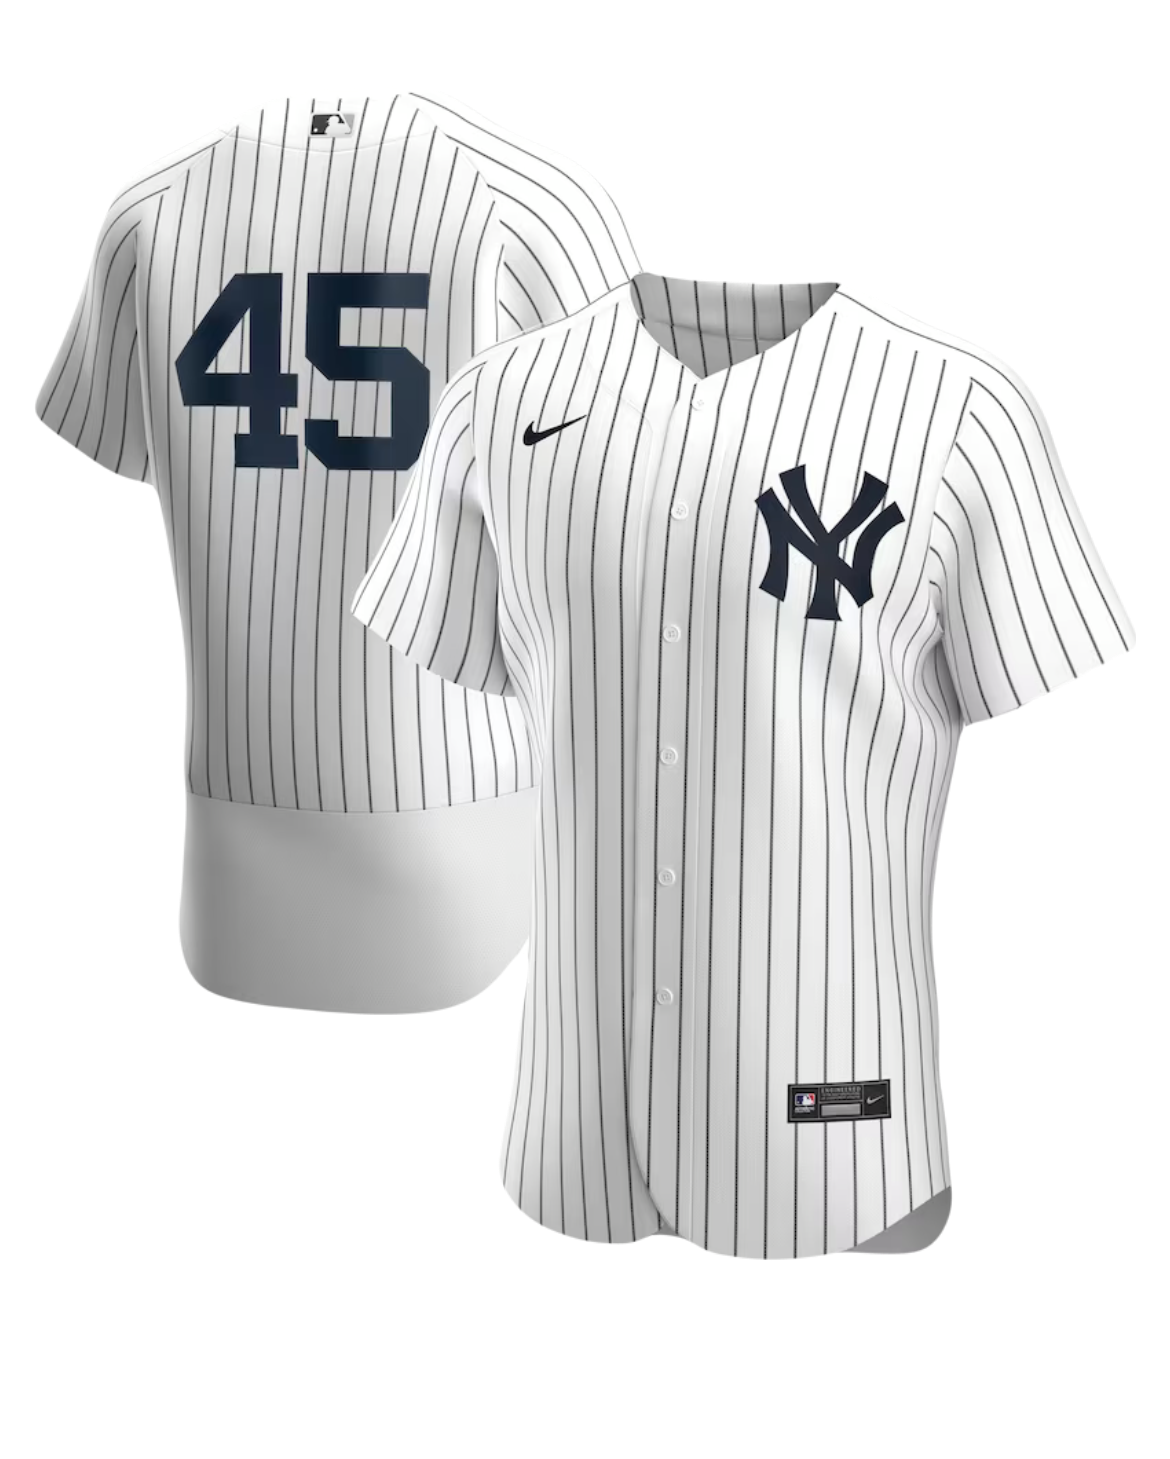 cole yankees jersey